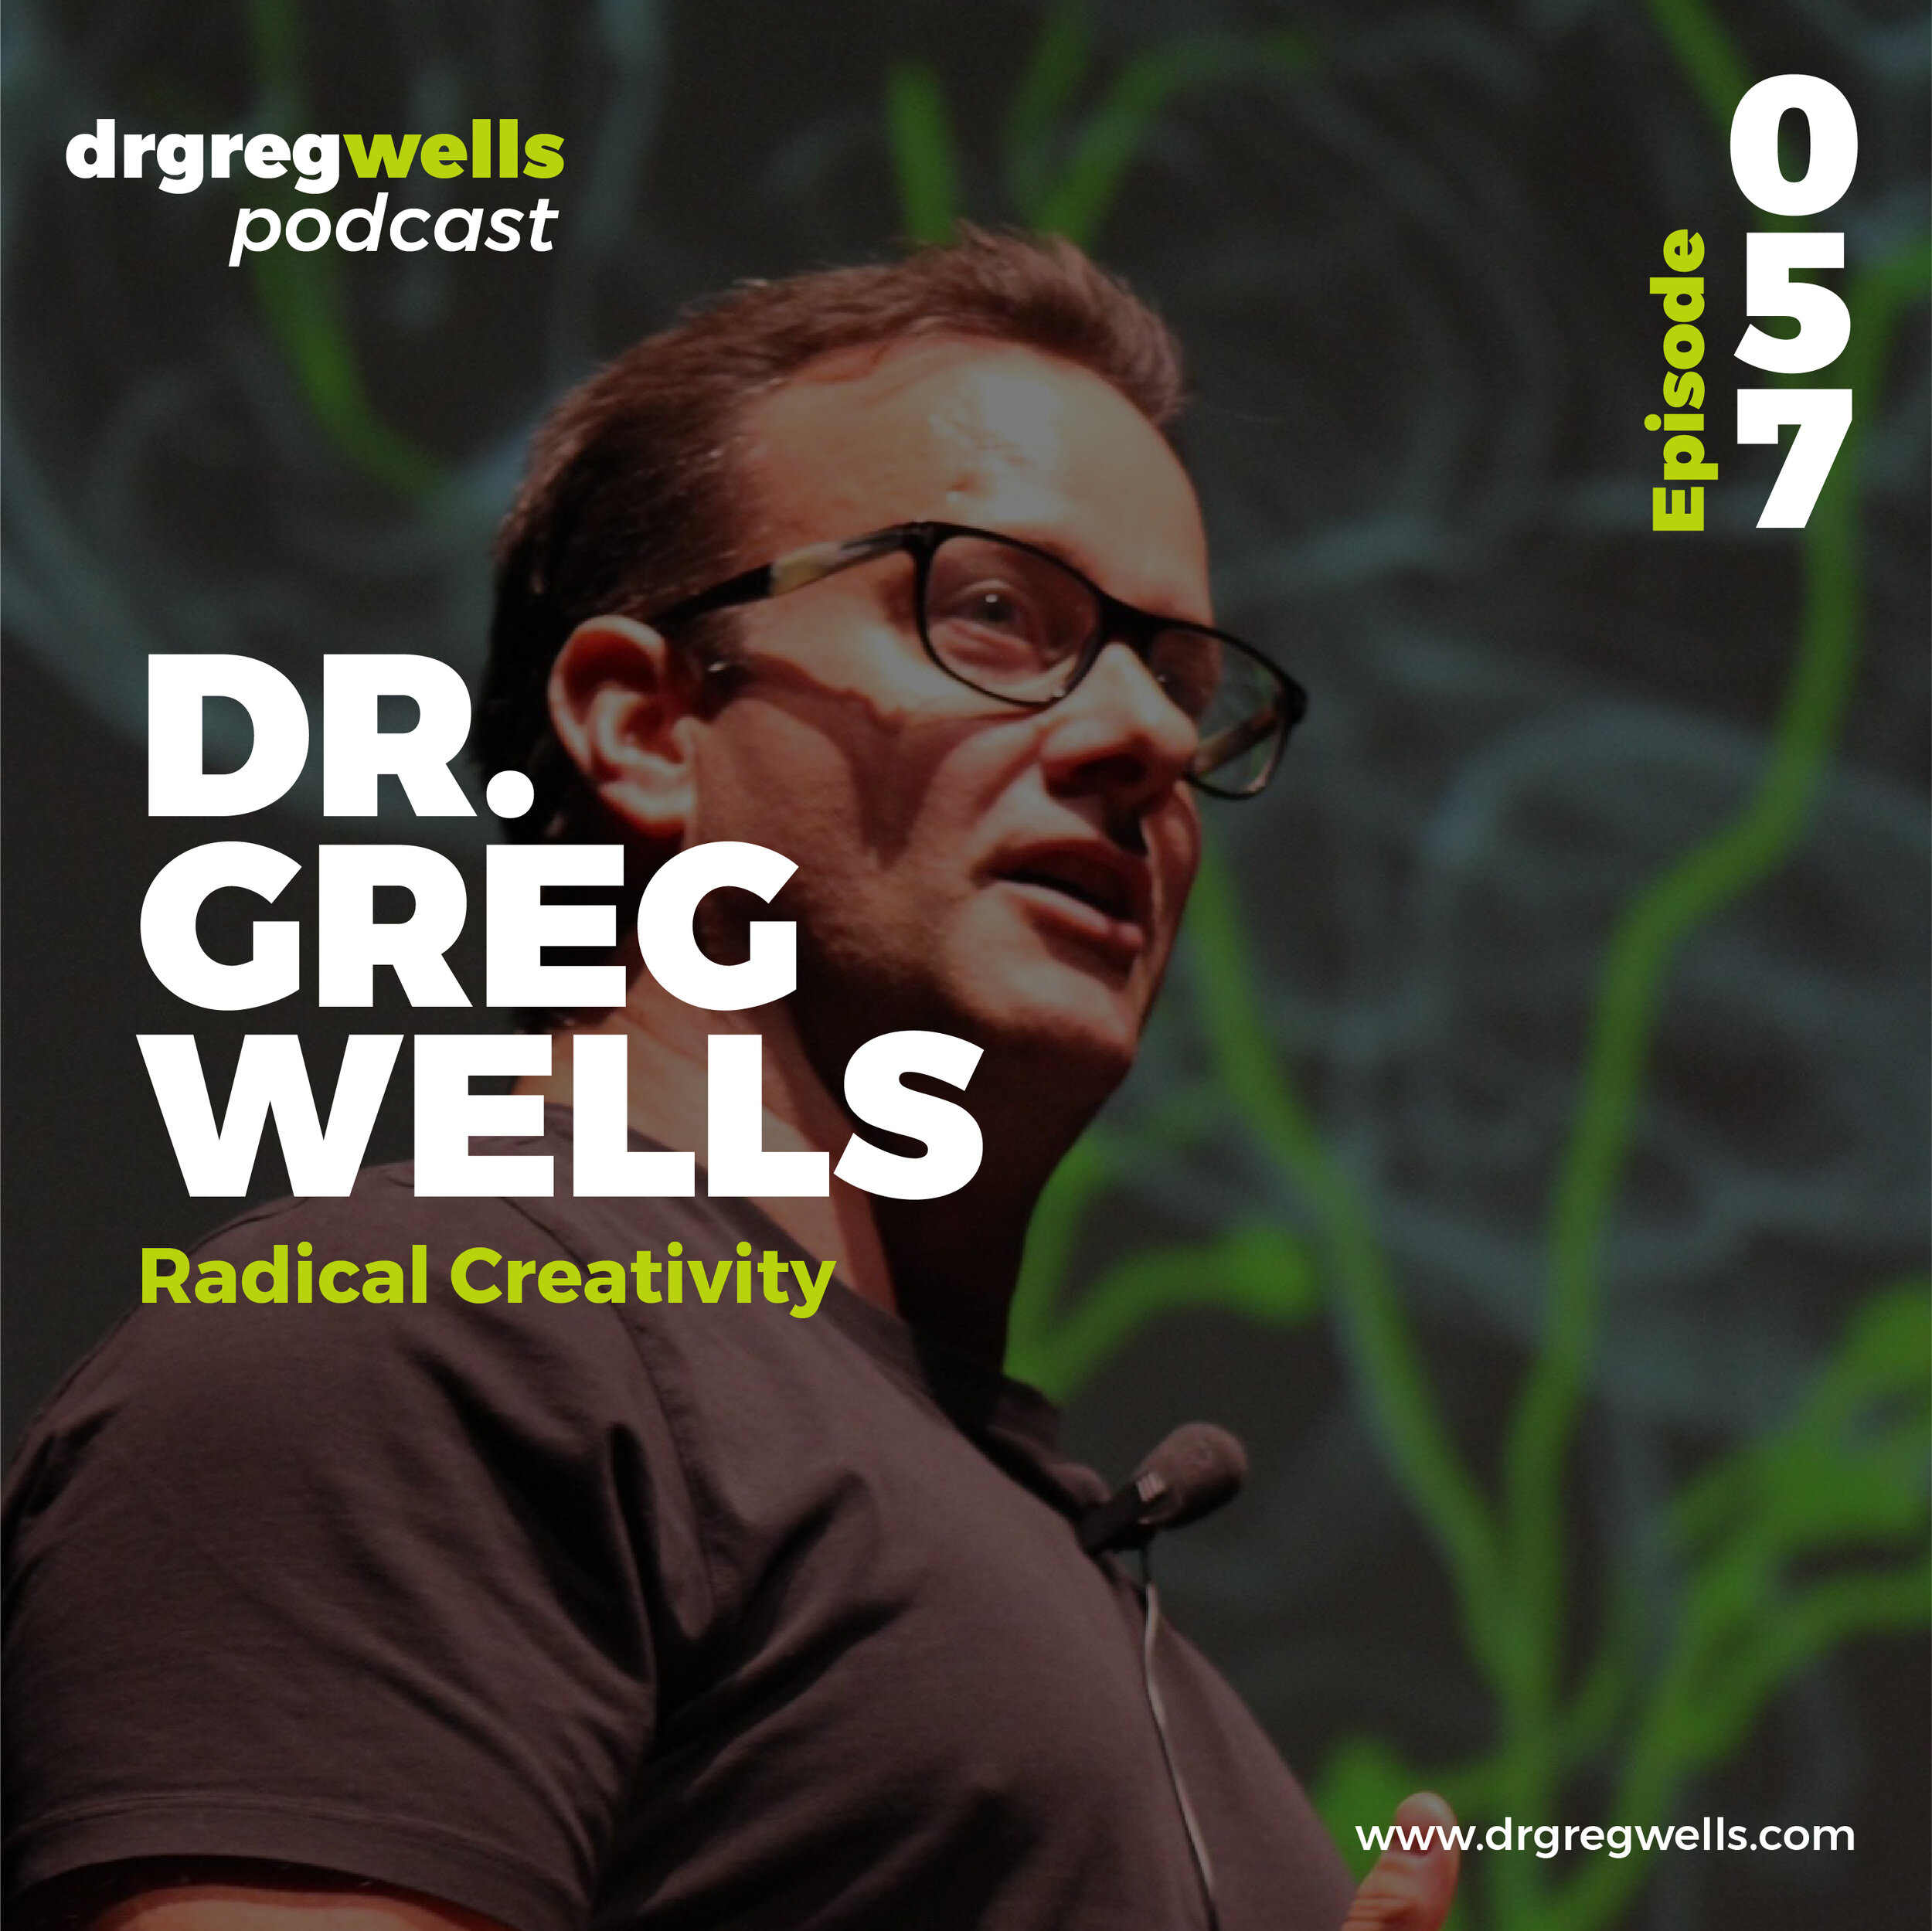 Dr Greg Wells Podcast Guest EP 55-57-03.jpg